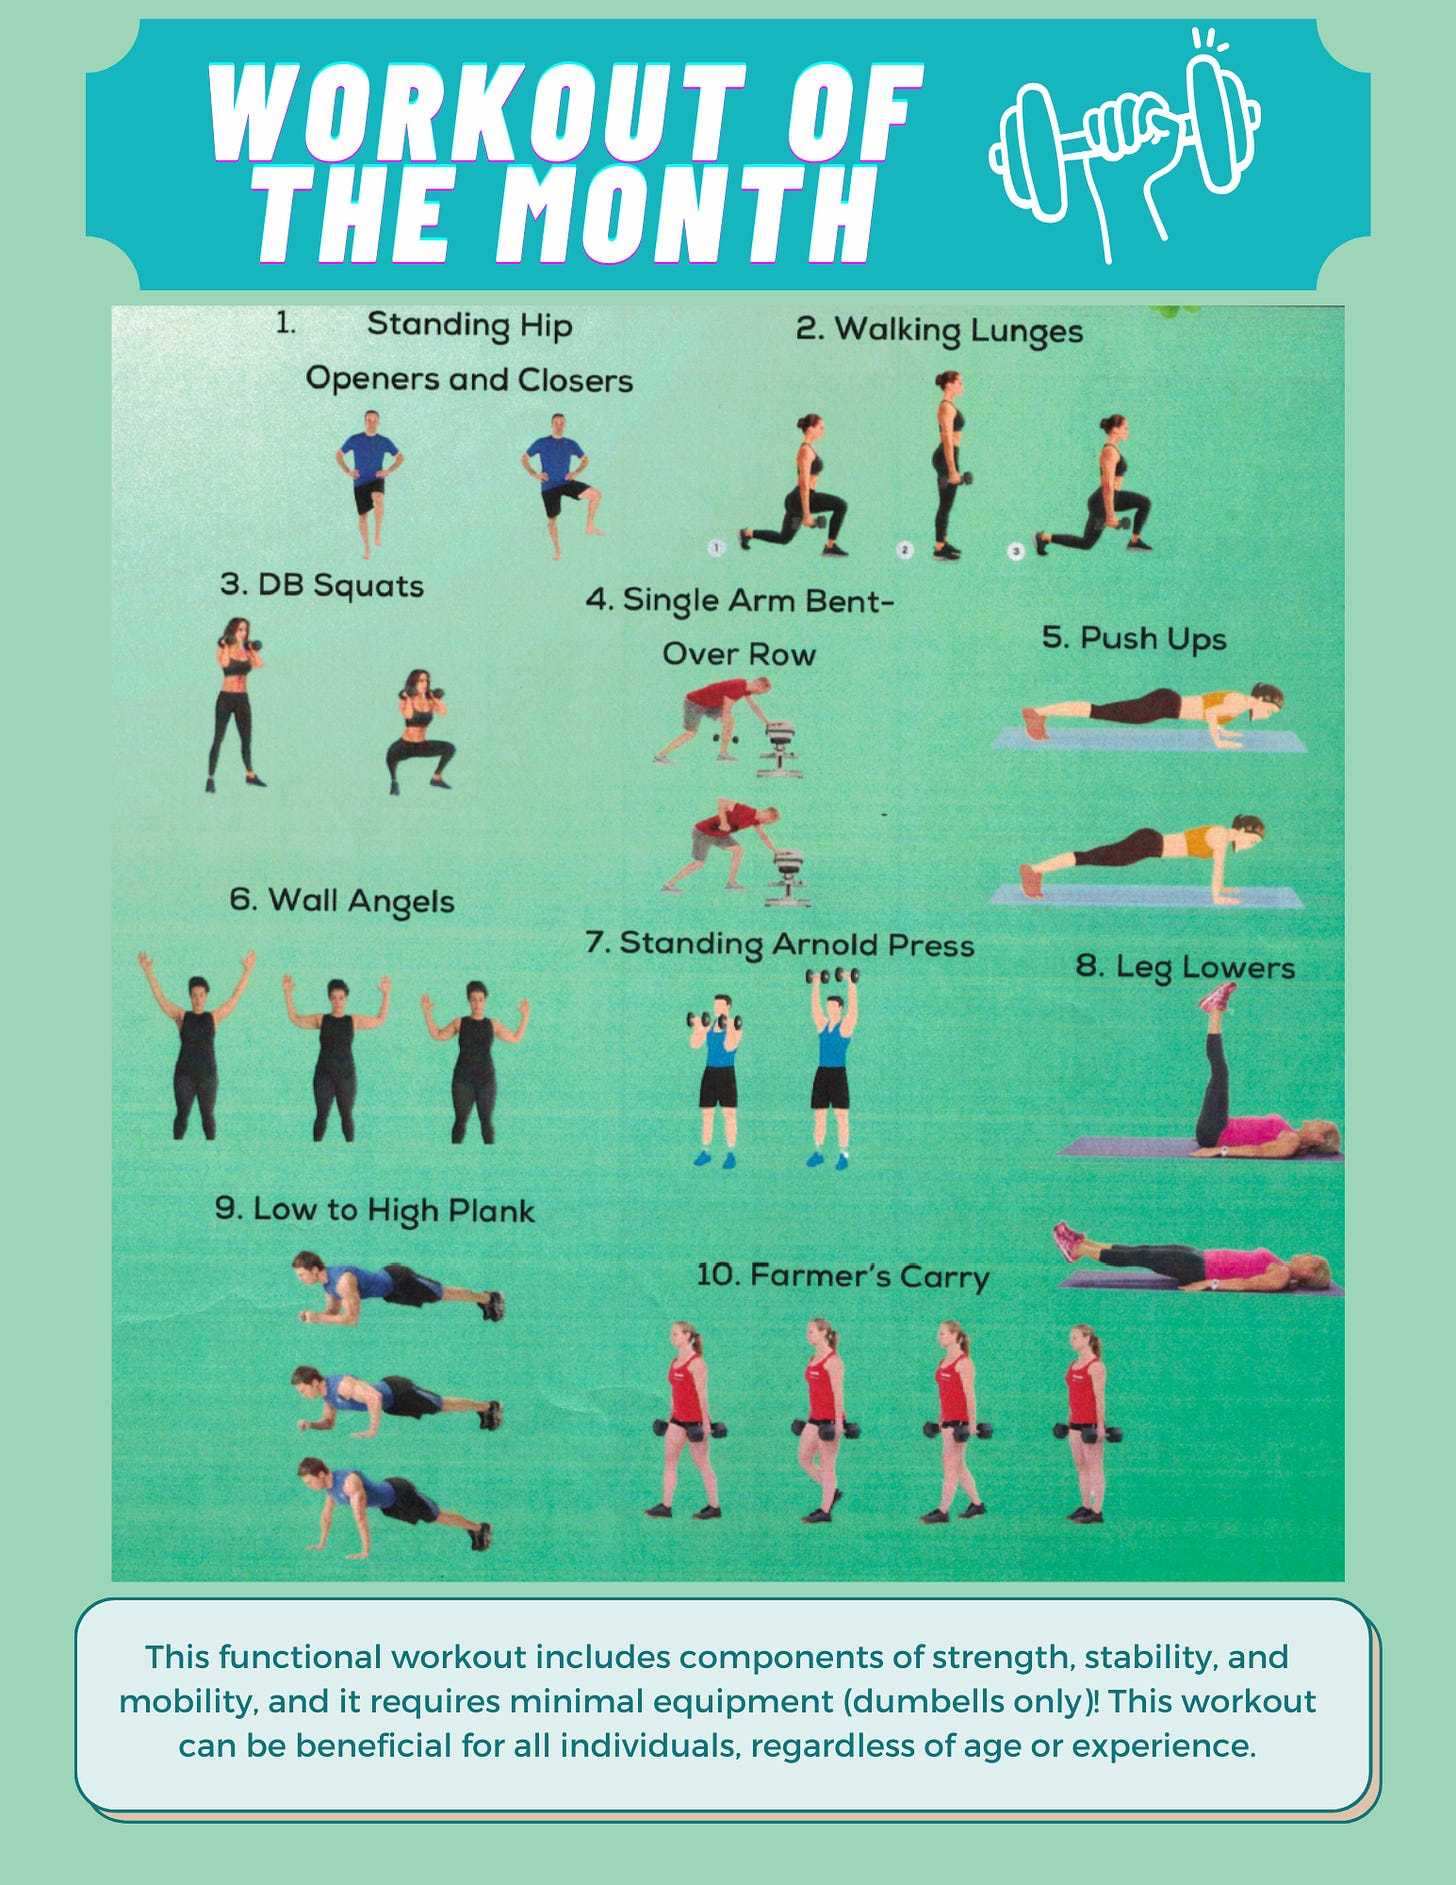 WORKOUT OF THE MONTH